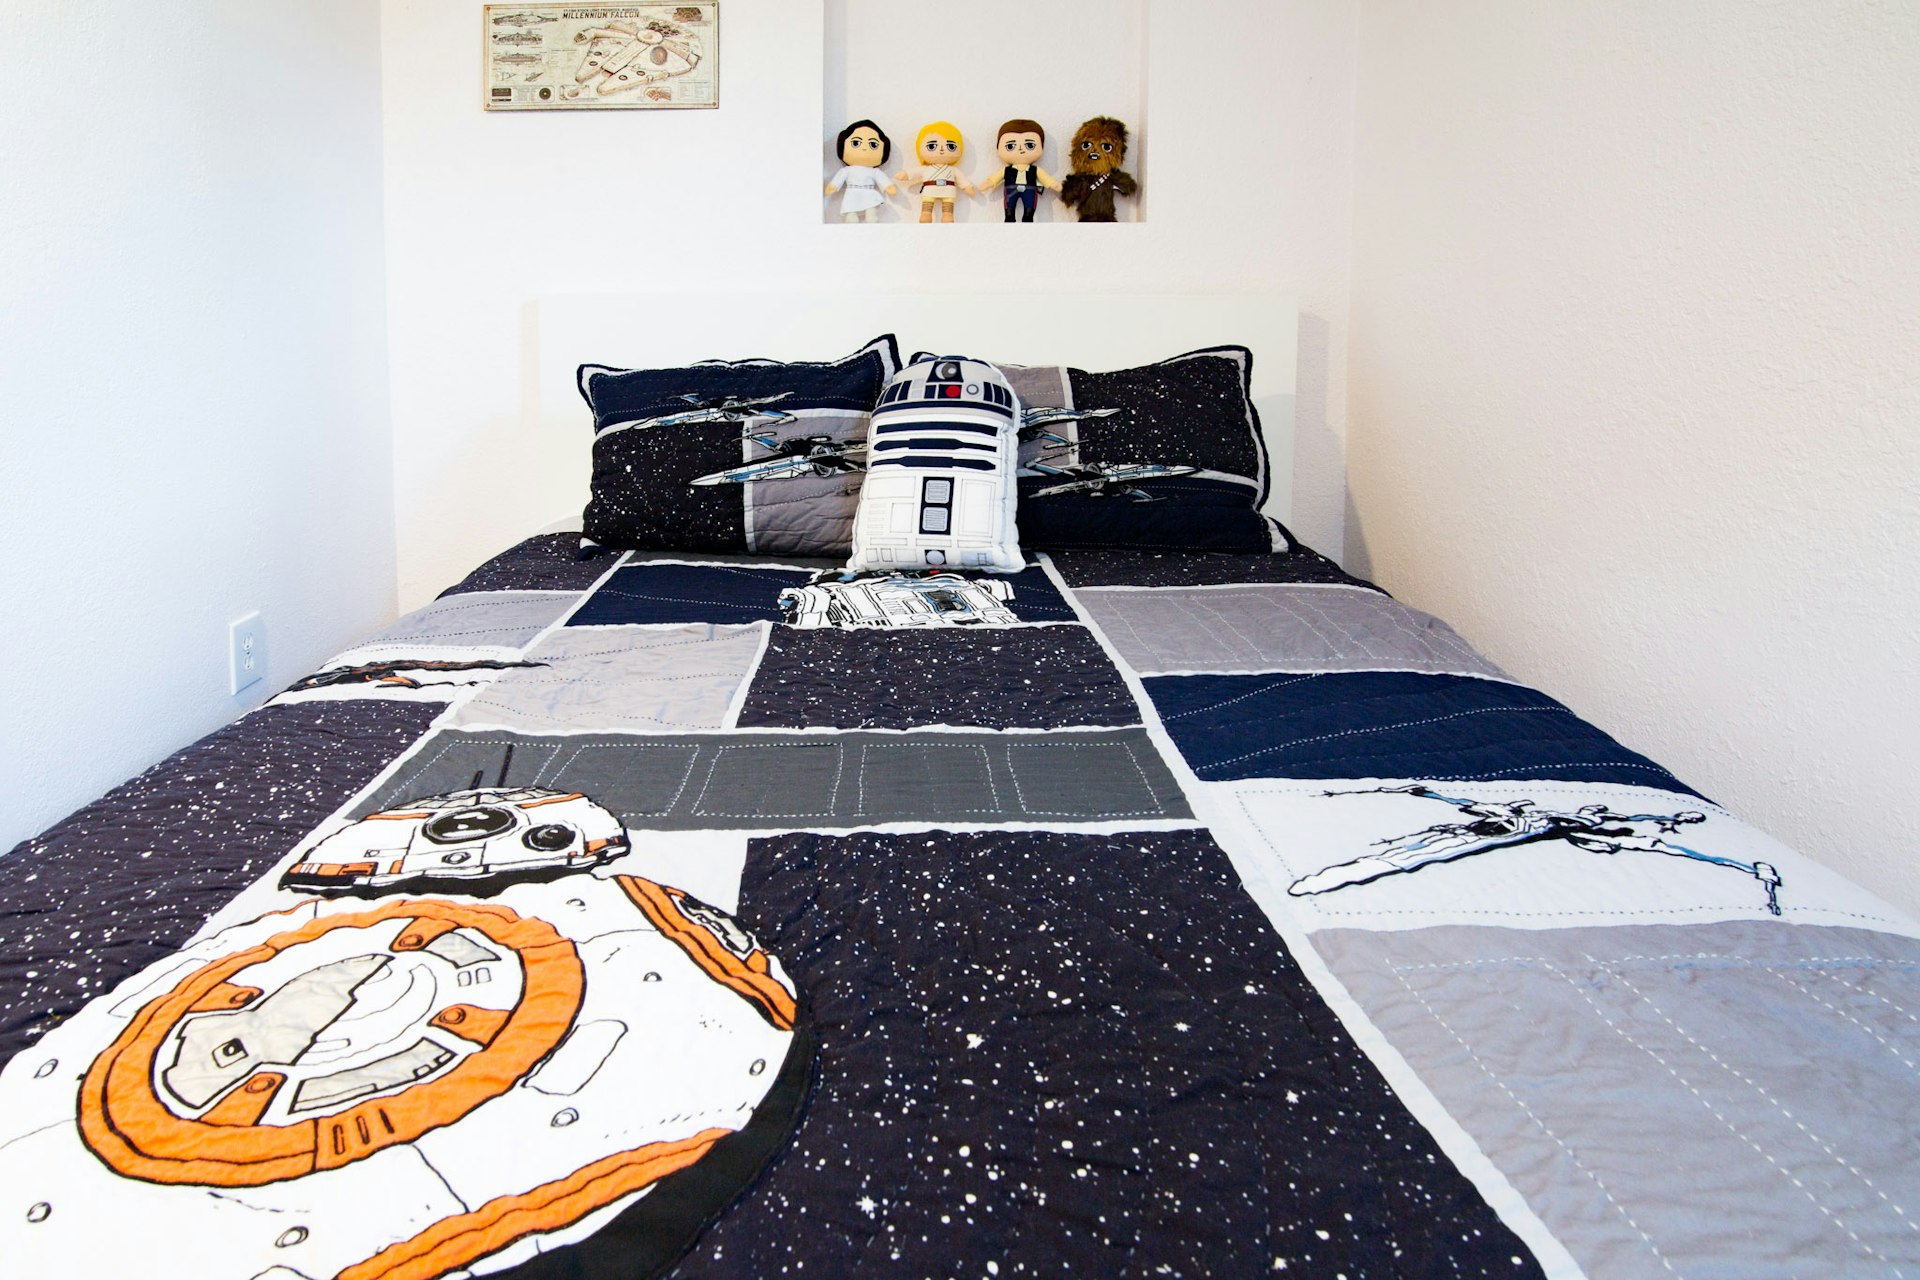 A picture of one bedroom in the Denver house featuring R2D2 plushies and decorations